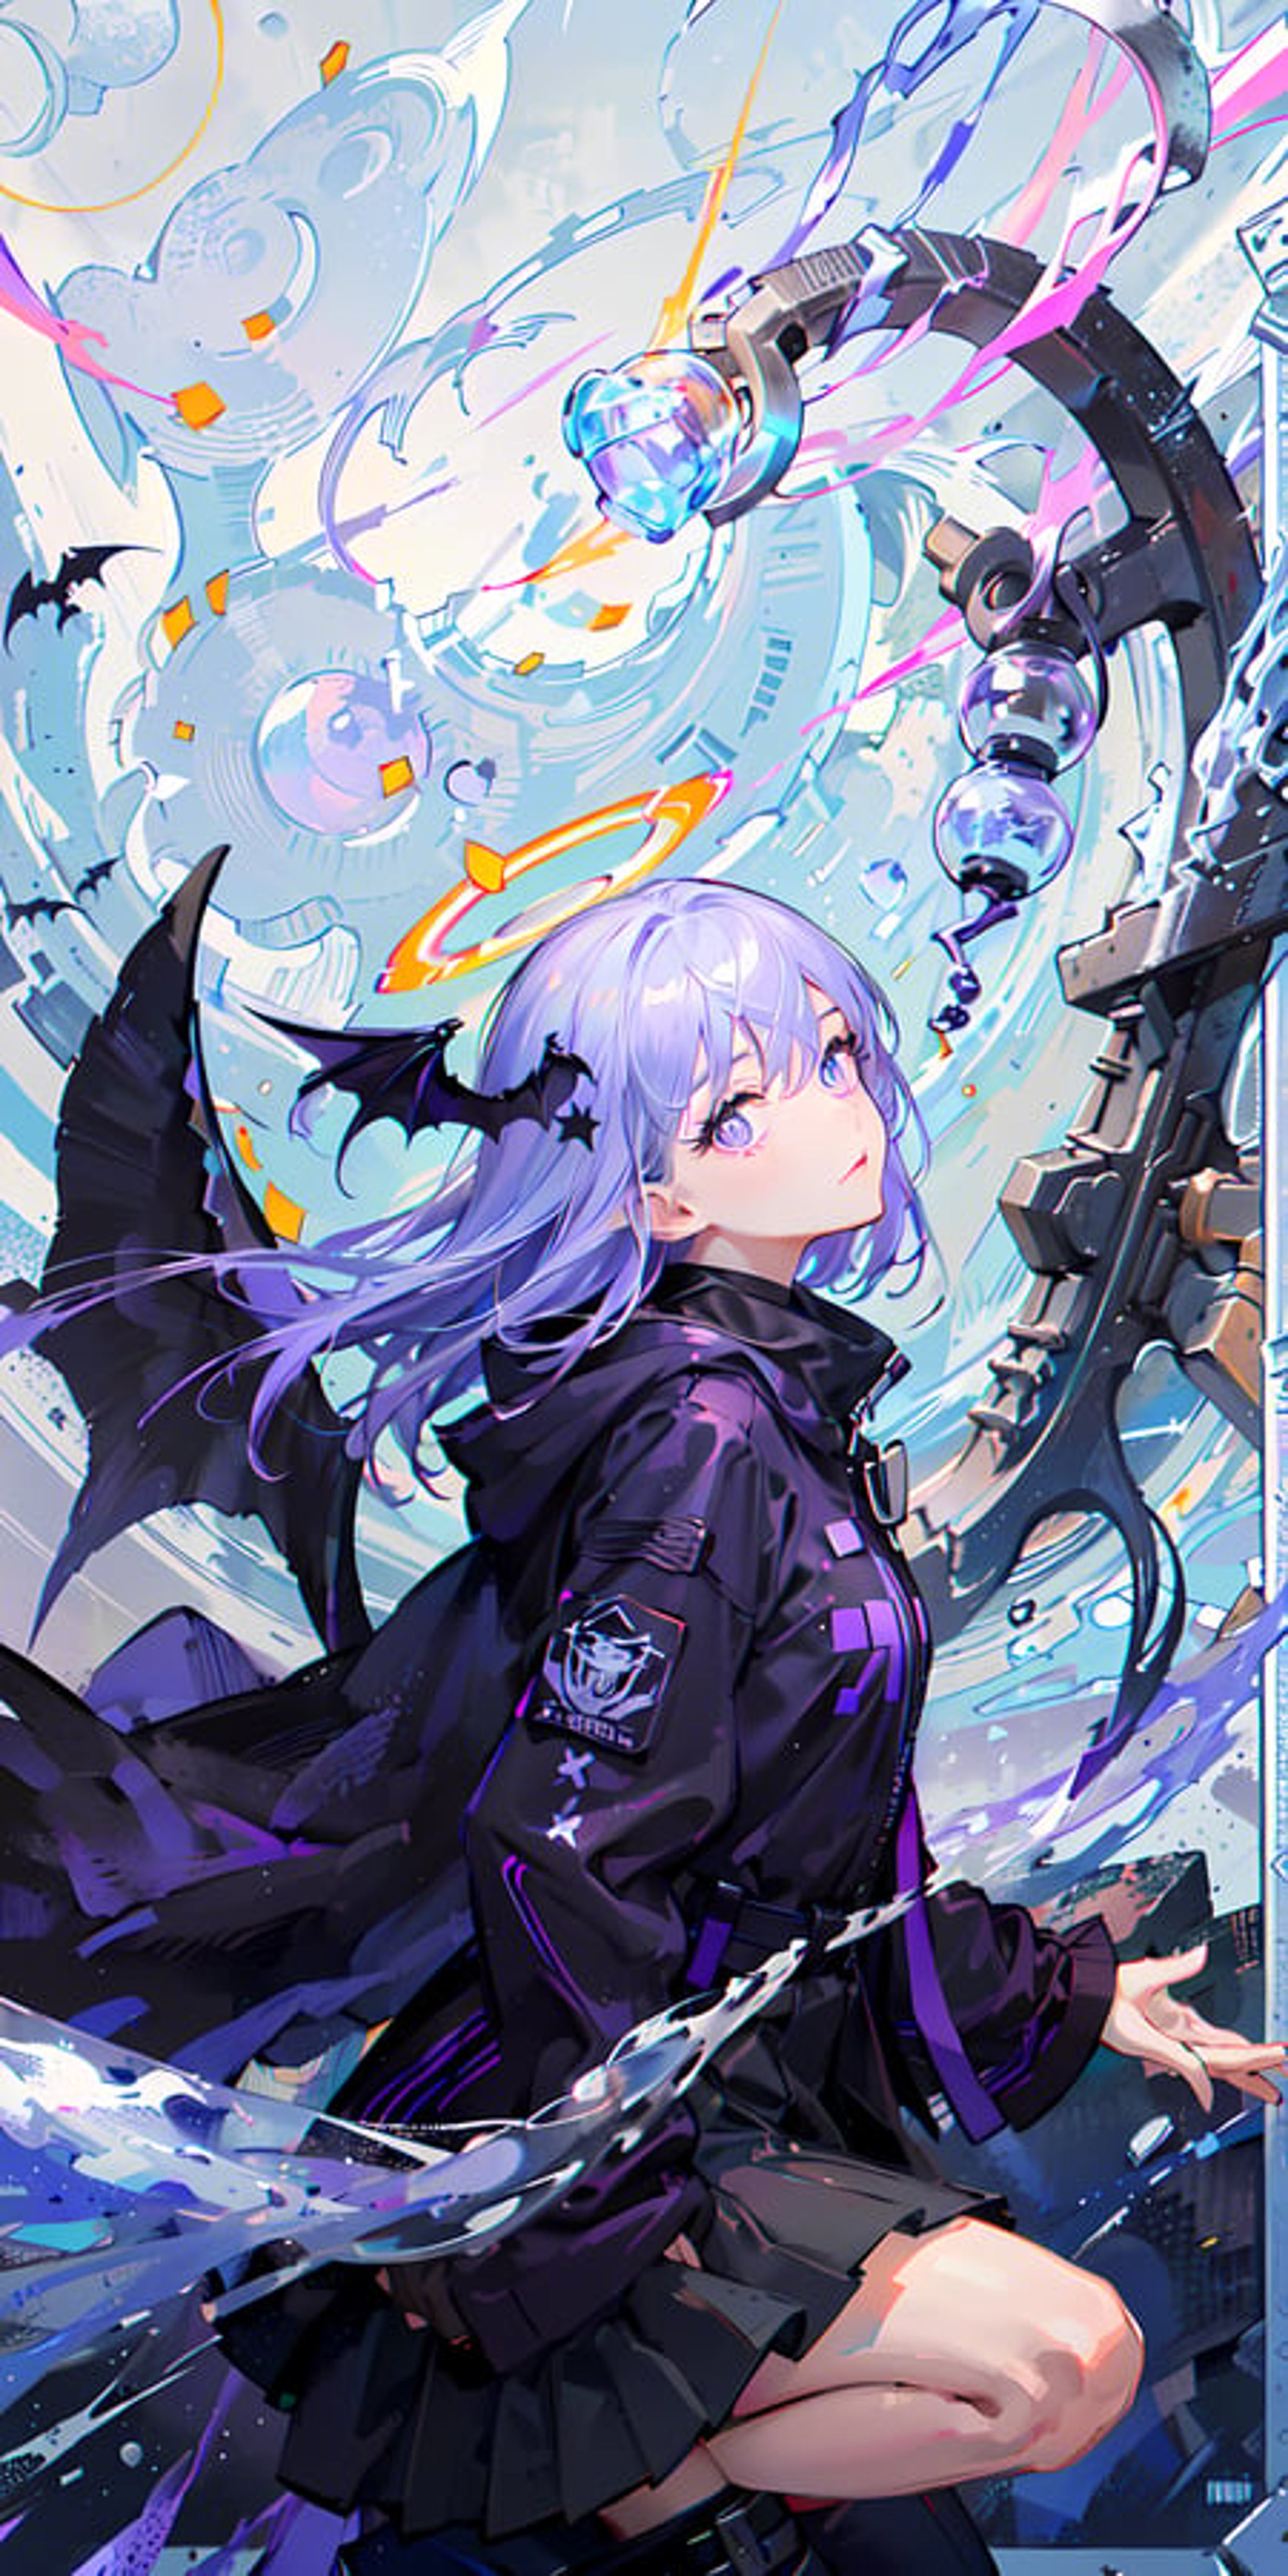 Anime girl wearing a black jacket with a halo and wings, surrounded by a swirling blue and purple background.